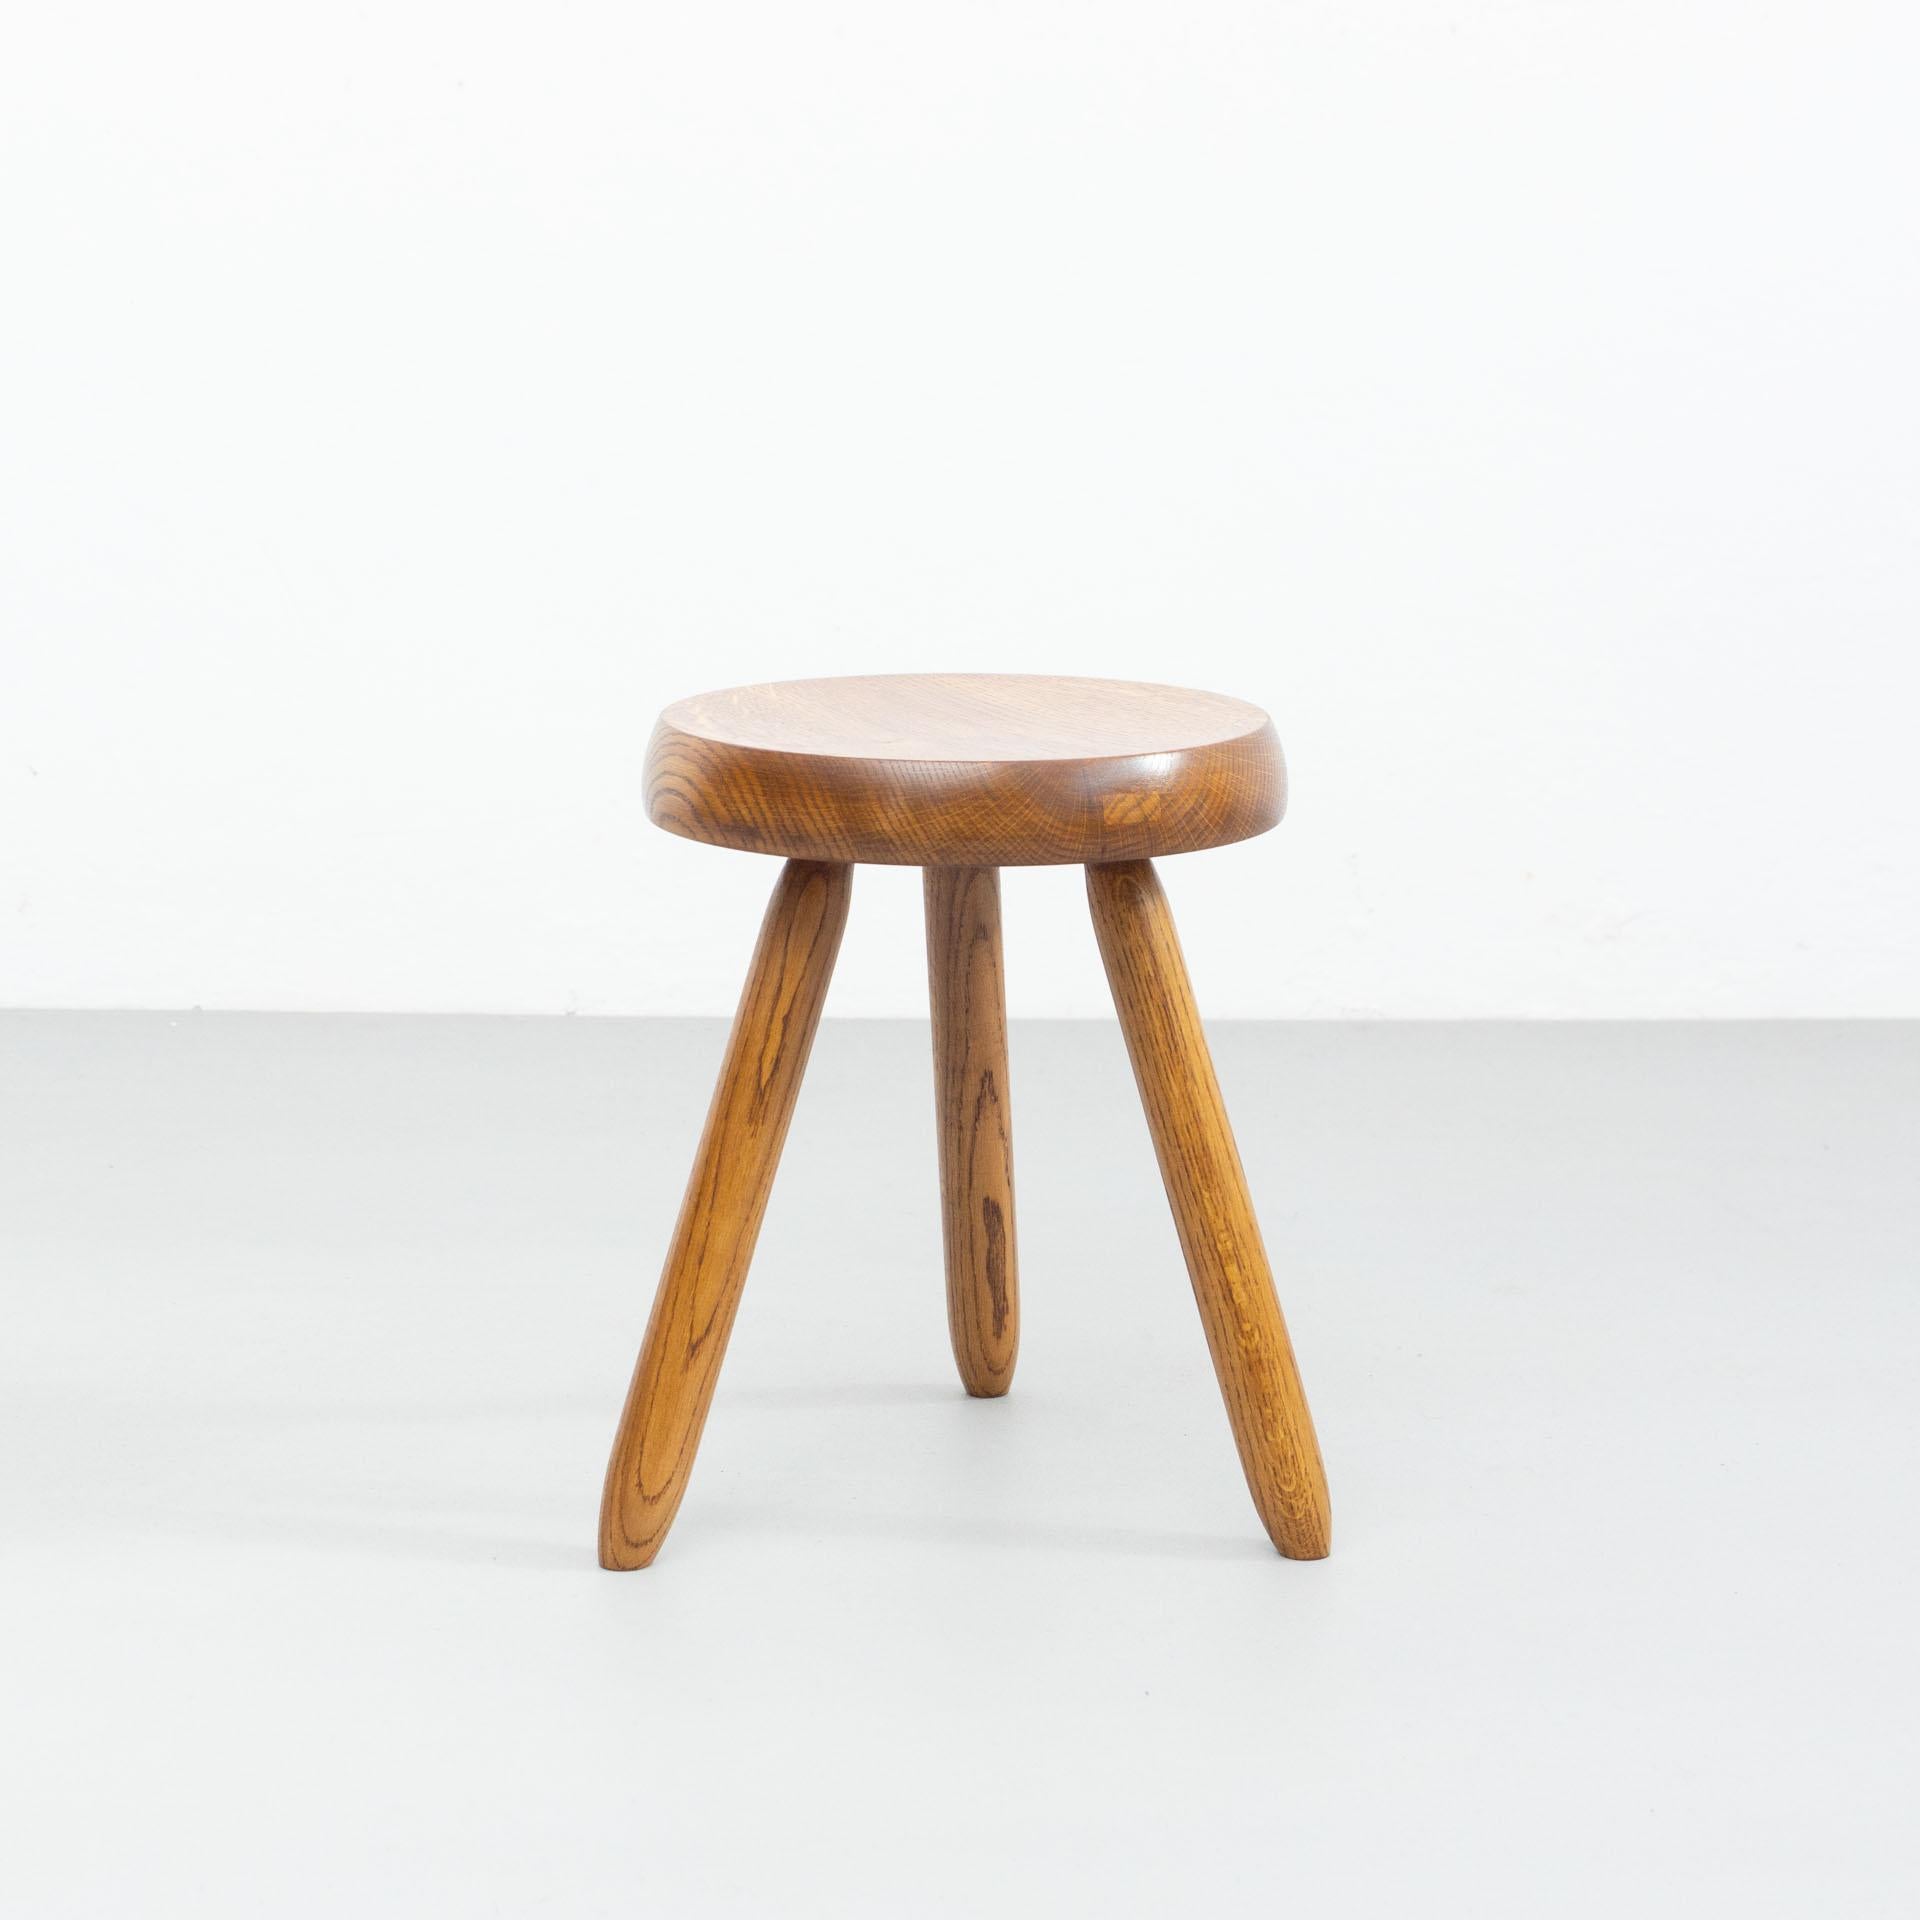 Set of three stools designed in the style of Charlotte Perriand.
Made by unknown manufacturer.

In good original condition, preserving a beautiful patina, with minor wear consistent with age and use. 

Materials:
Wood

Dimensions:
ø 32 cm x